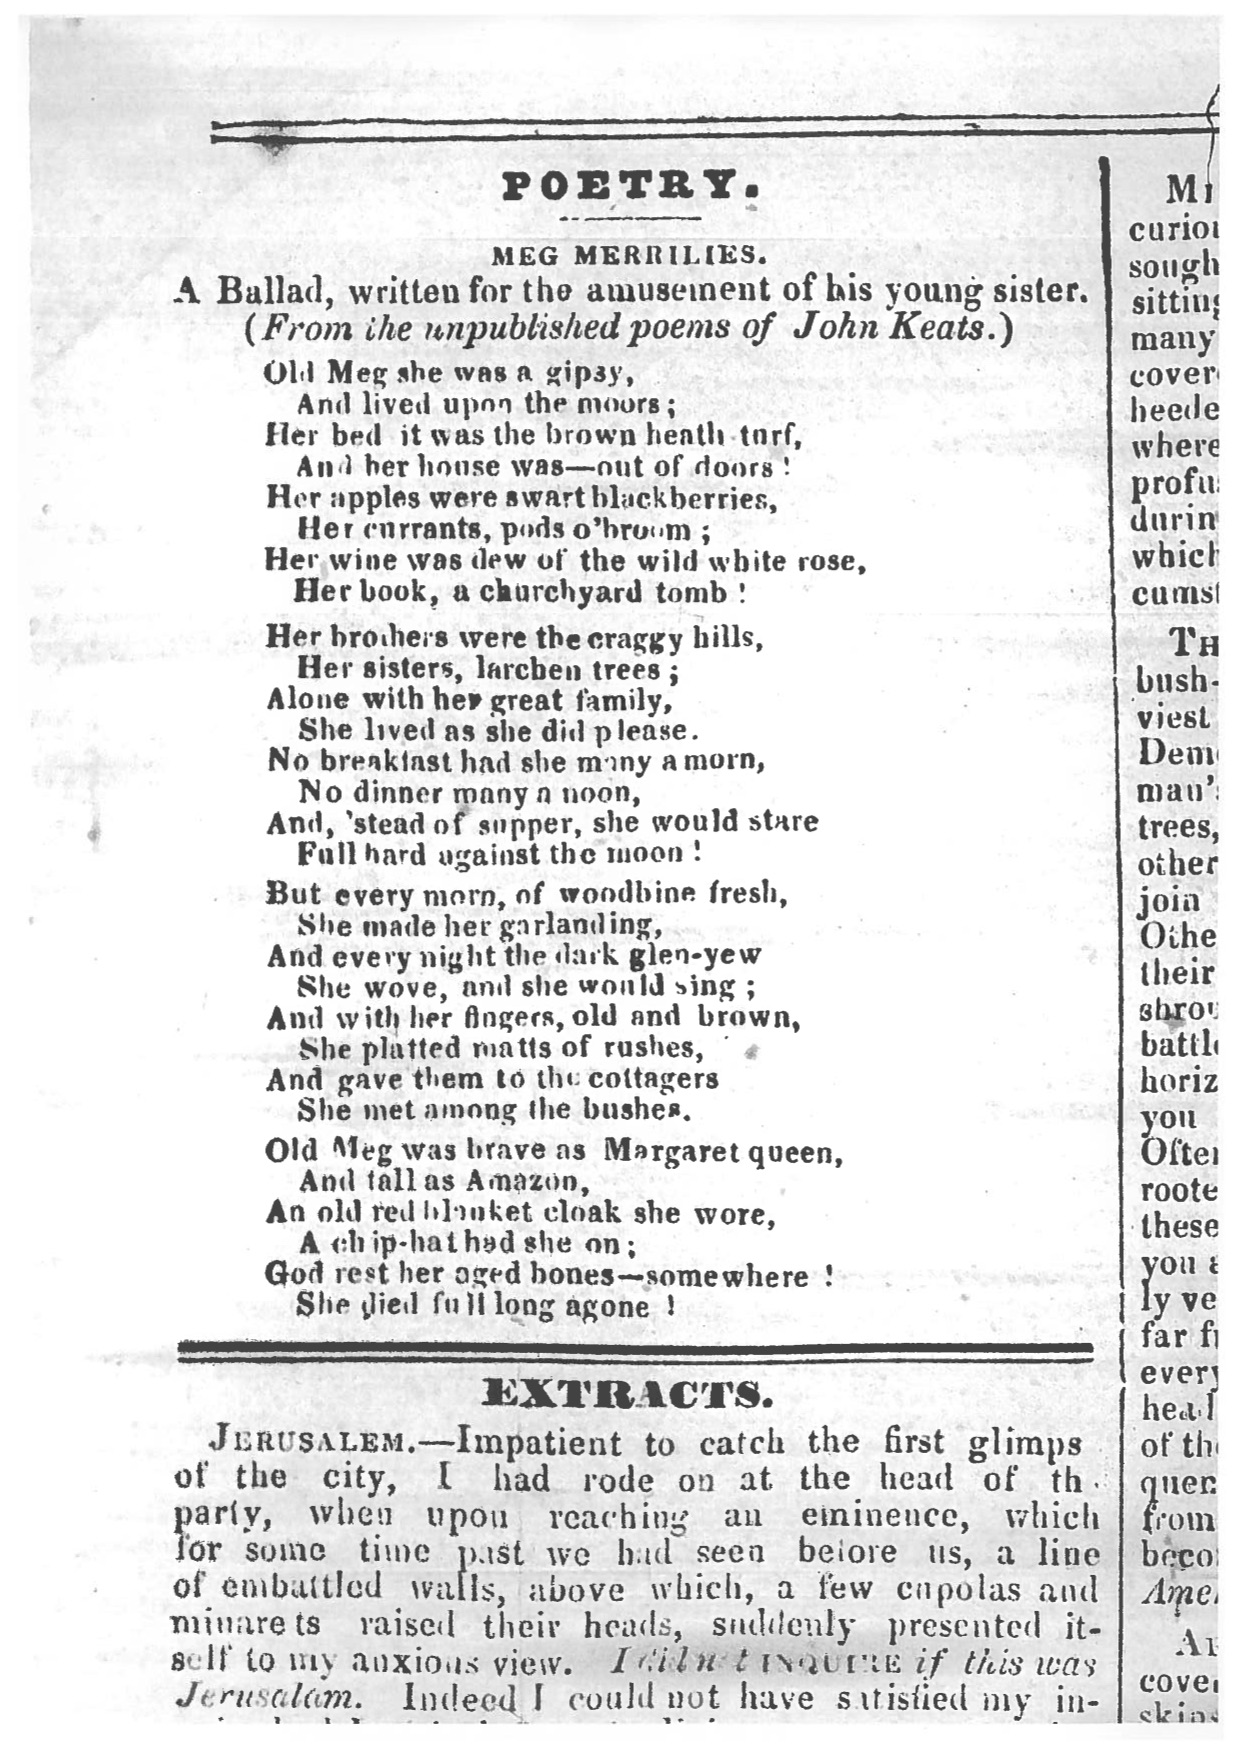 First publication of Old meg she was a gipsey, 22
        Nov 1838 in The Plymouth and Devonport Weekly Journal.
        Thanks to the Plymouth Central Library for making this image for MKP.